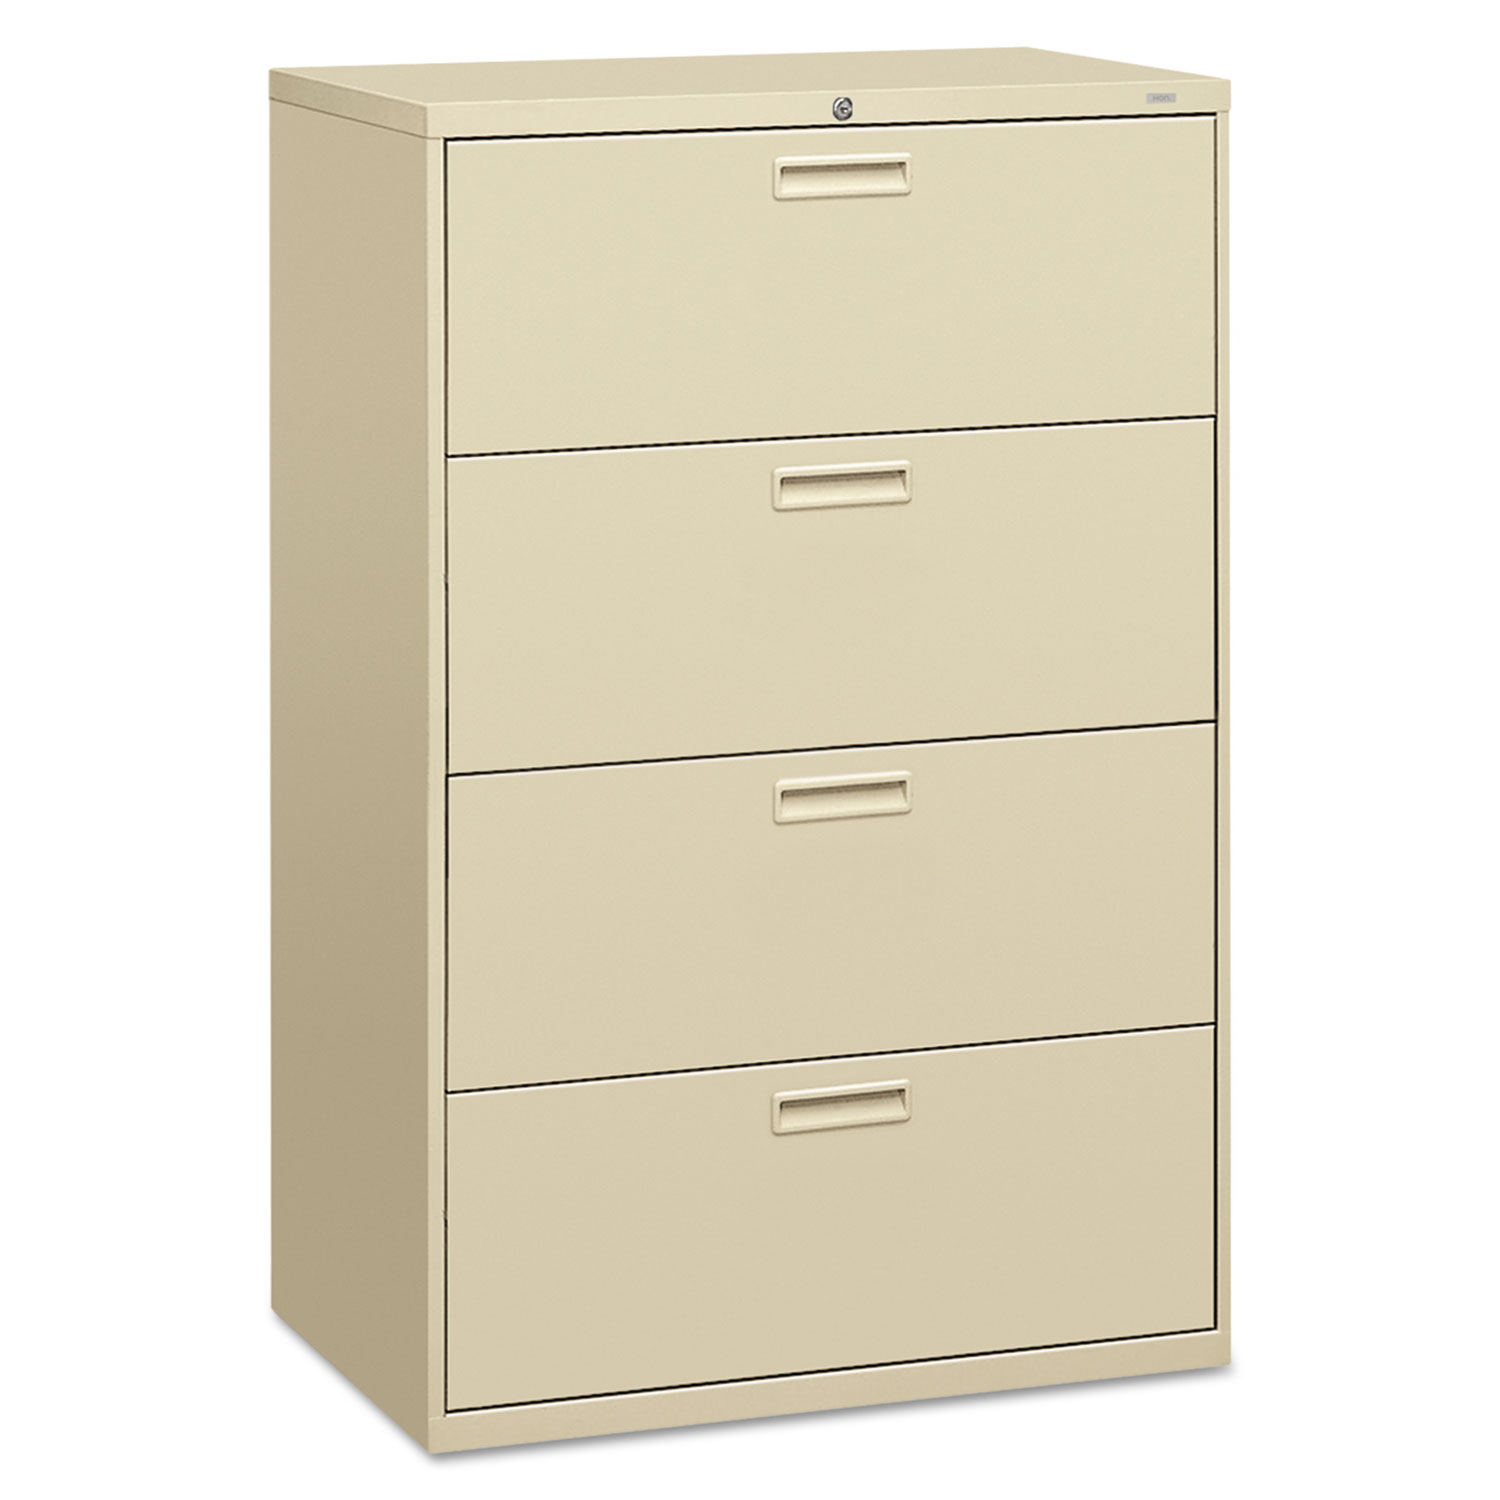 500 Series Four-Drawer Lateral File, 36w x 18d x 52-1/2h, Putty